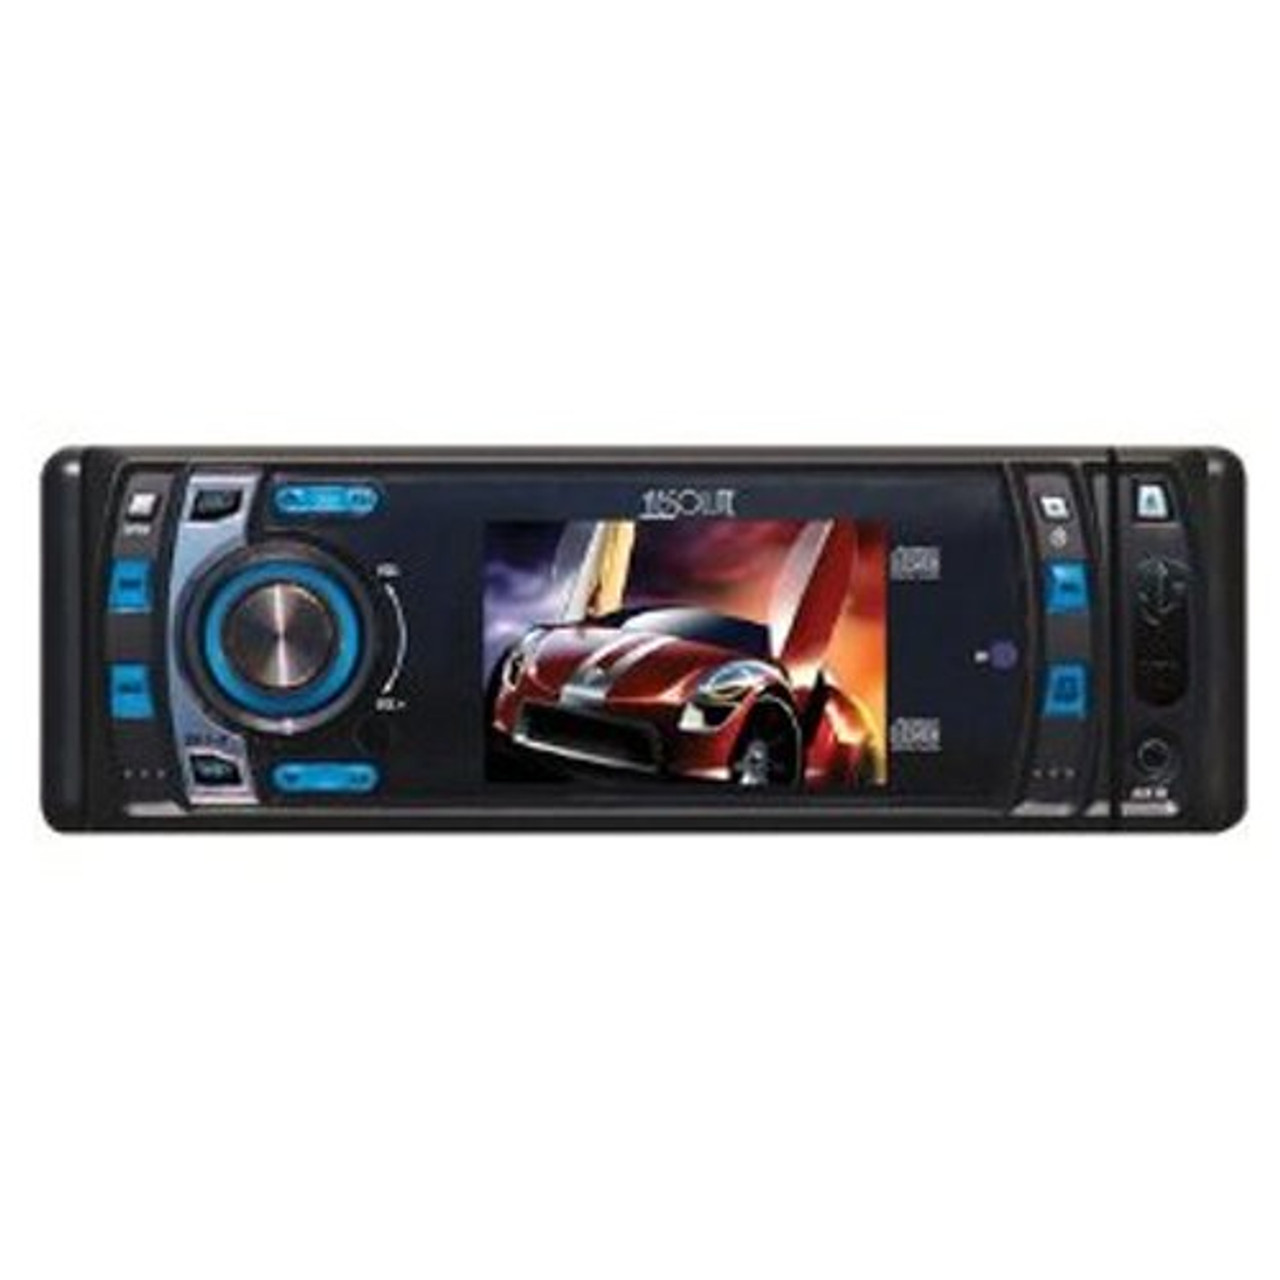 Absolute DMR400 4-Inch In-Dash Receiver with DVD Player Flip Down Detachable Panel, T feet Screen